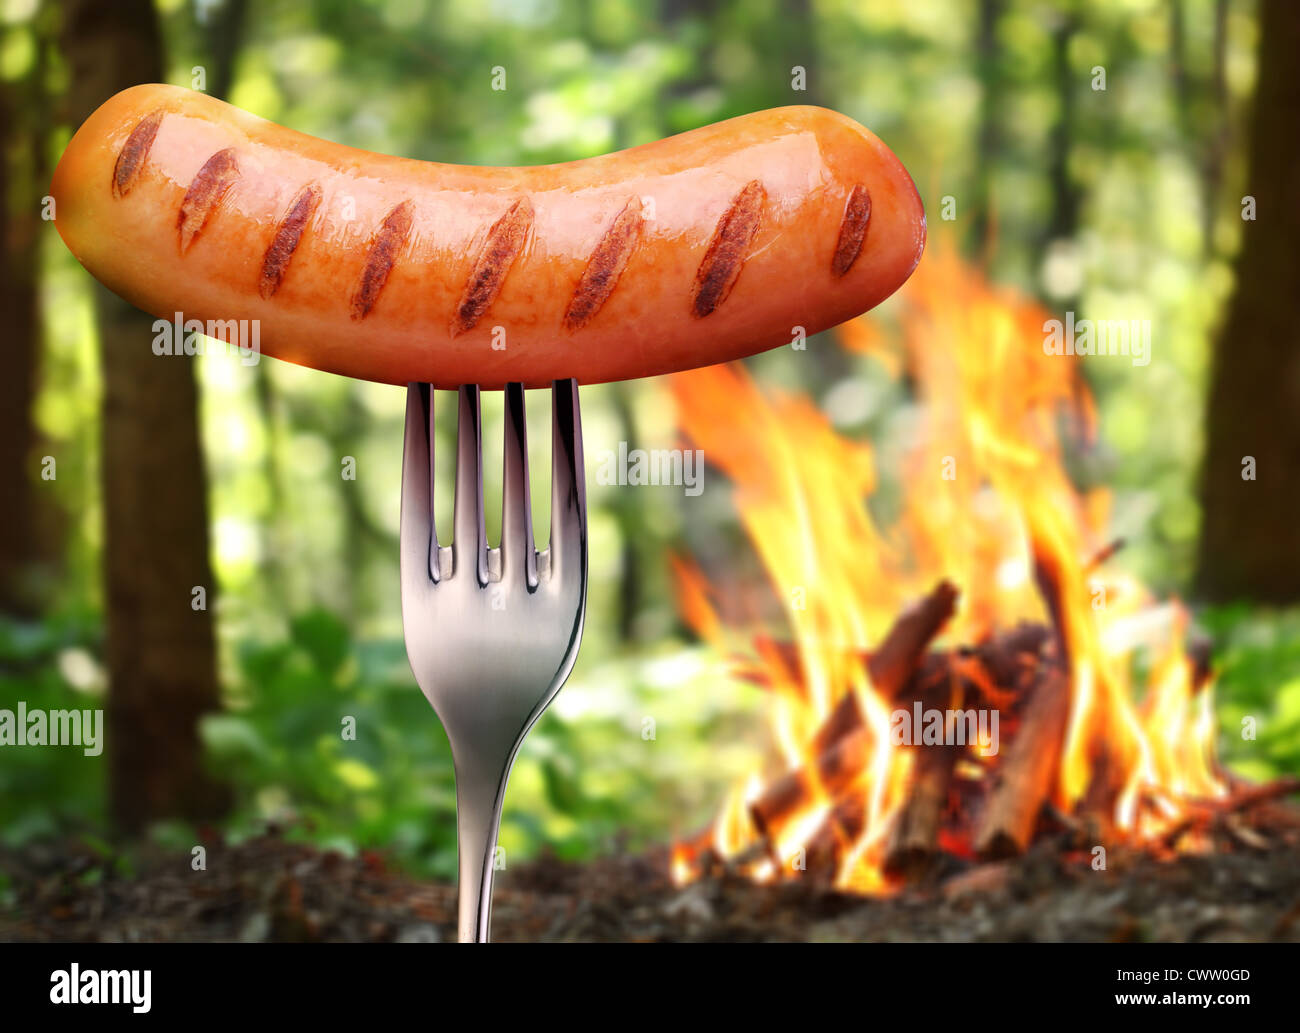 Sausage on a fork. In the background a bonfire in the forest. Stock Photo